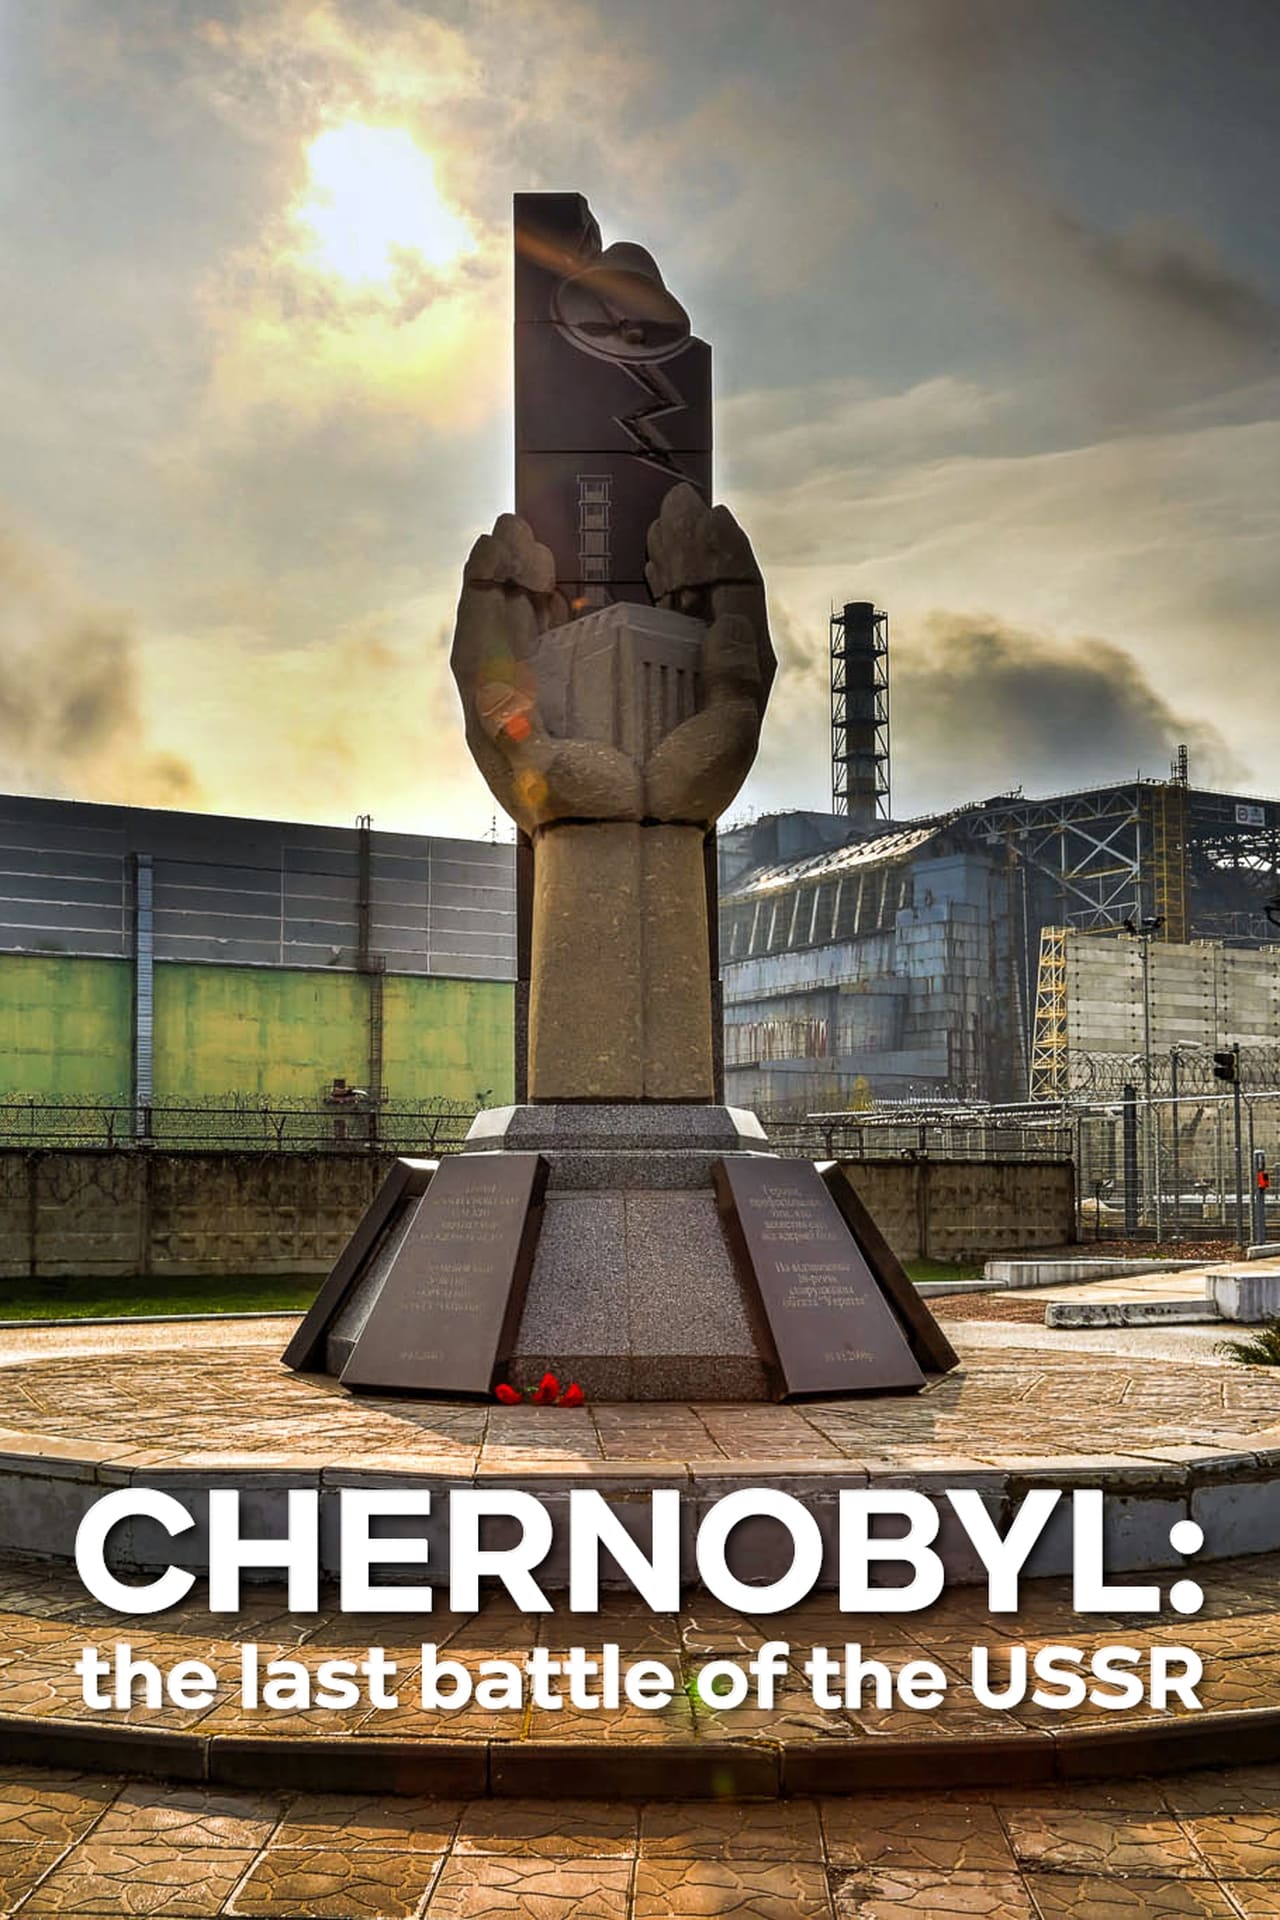 Chernobyl: The Last Battle of the USSR